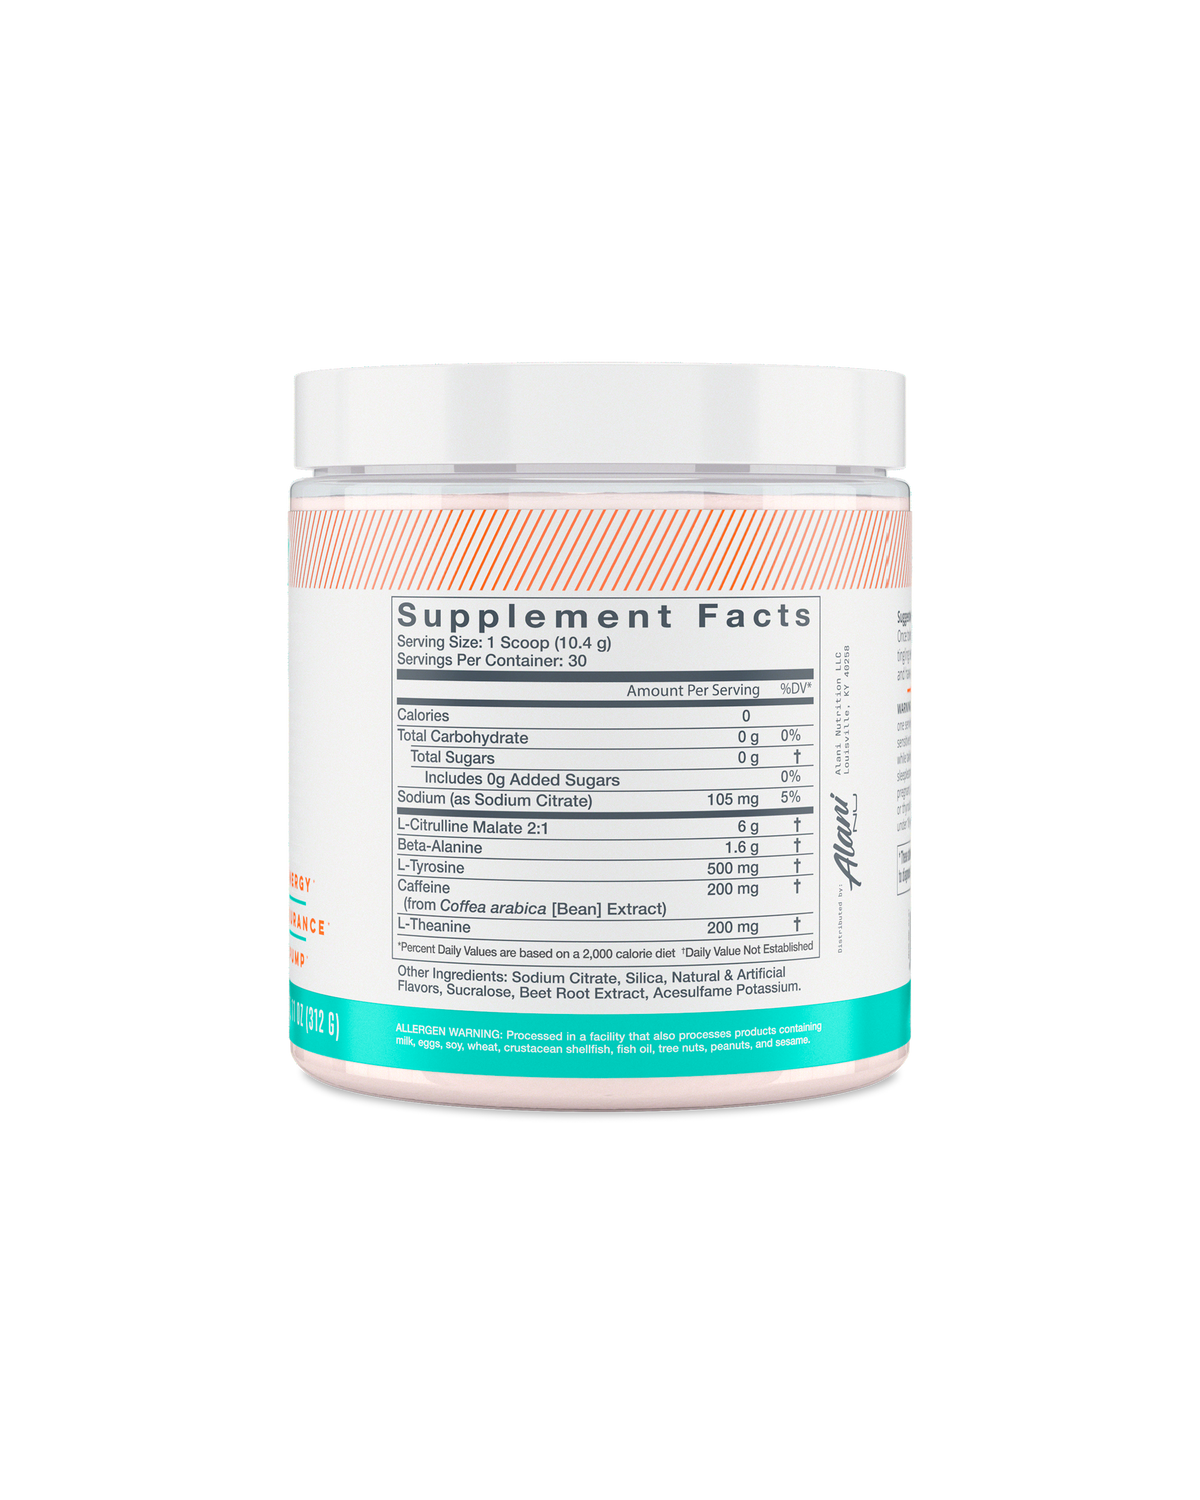 A back view of Pre-workout in Rainbow Candy flavor highlighting supplement facts.